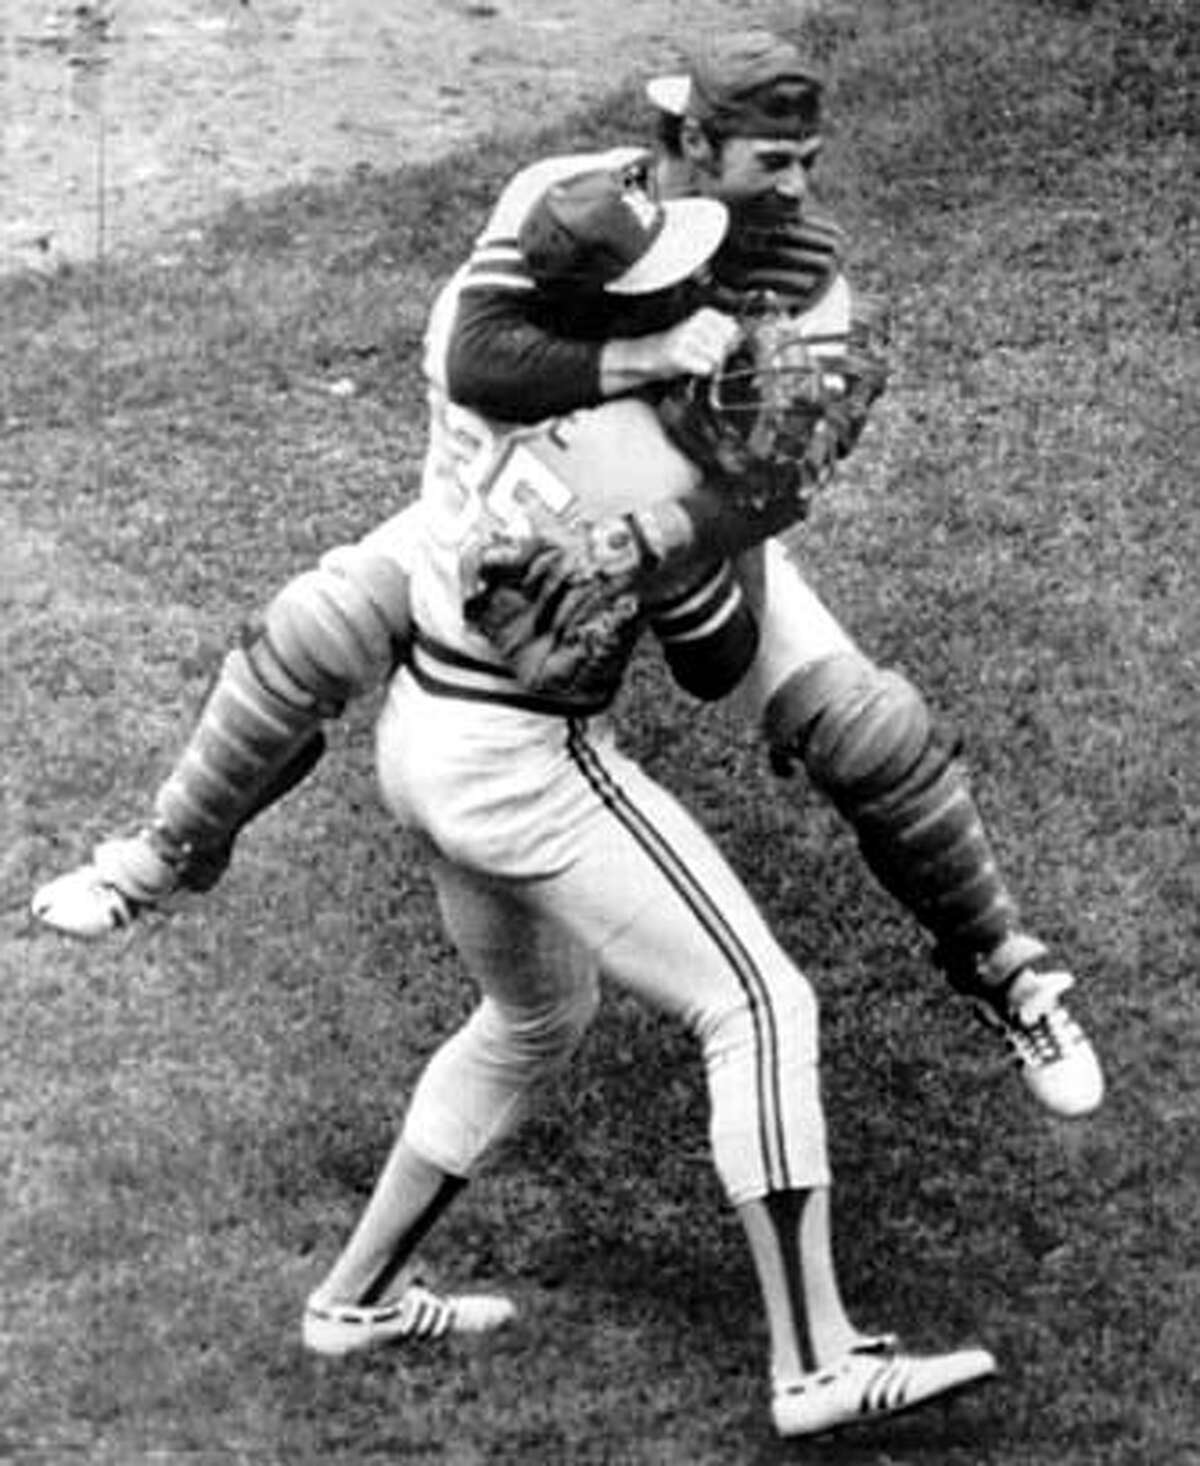 .jpg October 13, 1972 - A's catcher Gene Tenace leaps into the arms of pitcher Vida Blue in celebration after the A's clinched the American League Championship Series over the Detroit Tigers on Oct. 13, 1972 to advance to the World Series. PHOTO CREDIT: unknown